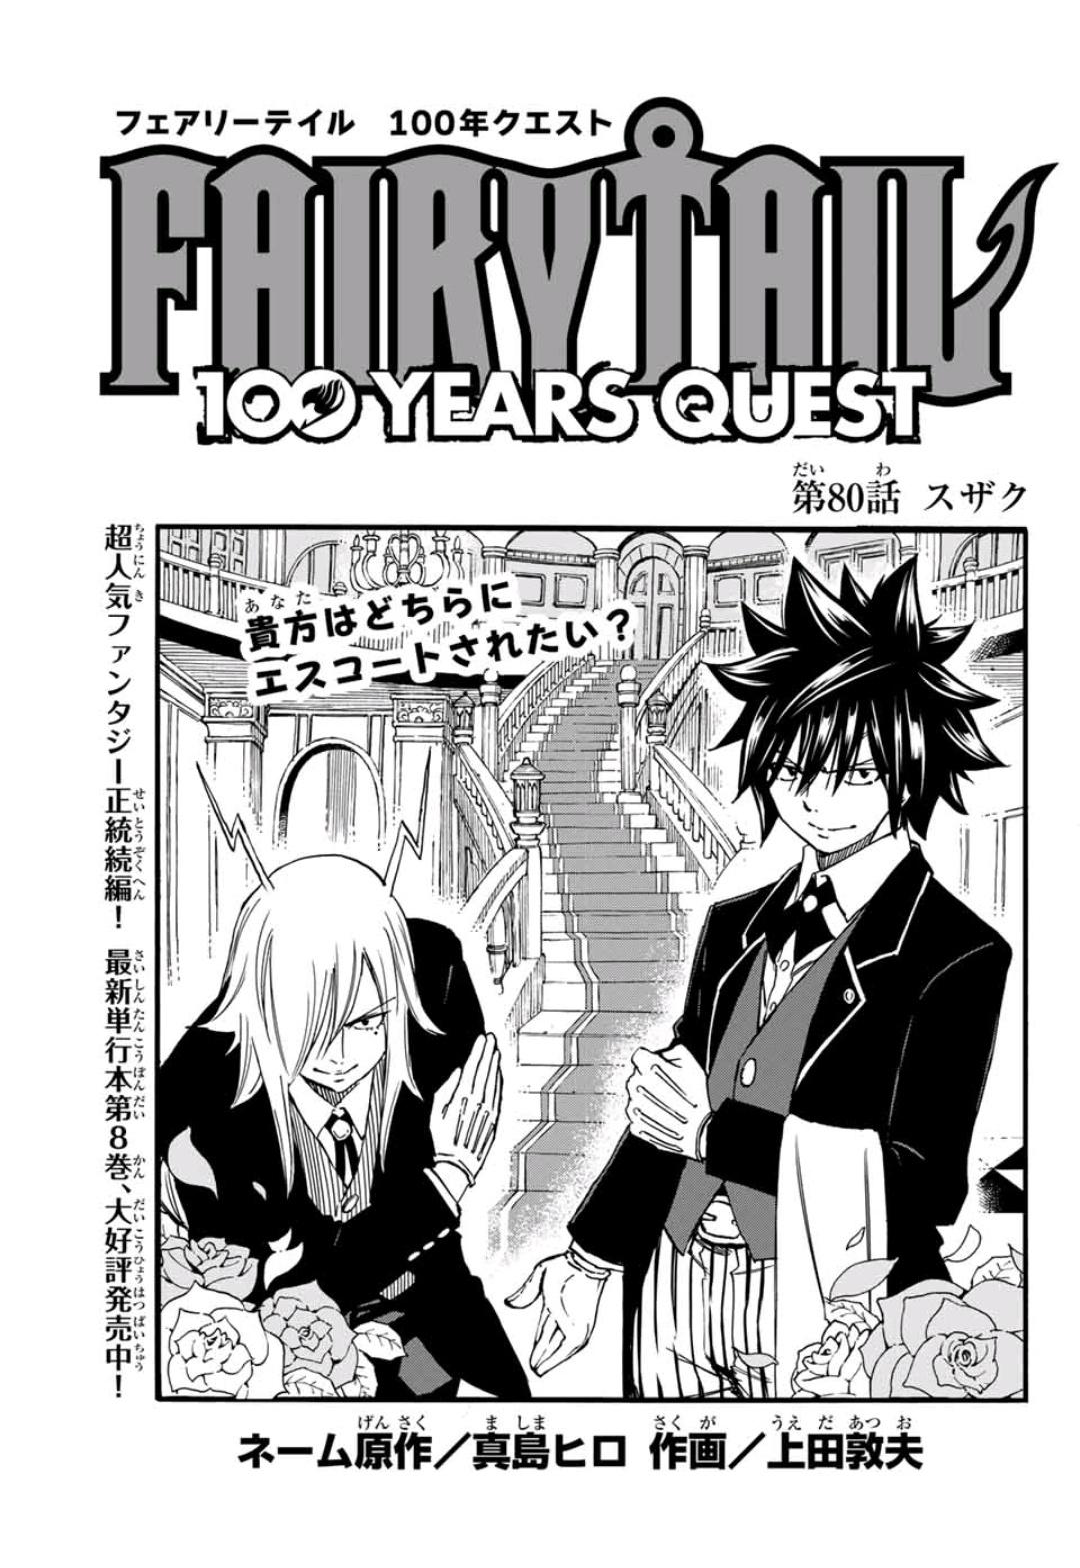 Fairy Tail 100 Years Quest Chapter 80 Fairy Tail Wiki Fandom